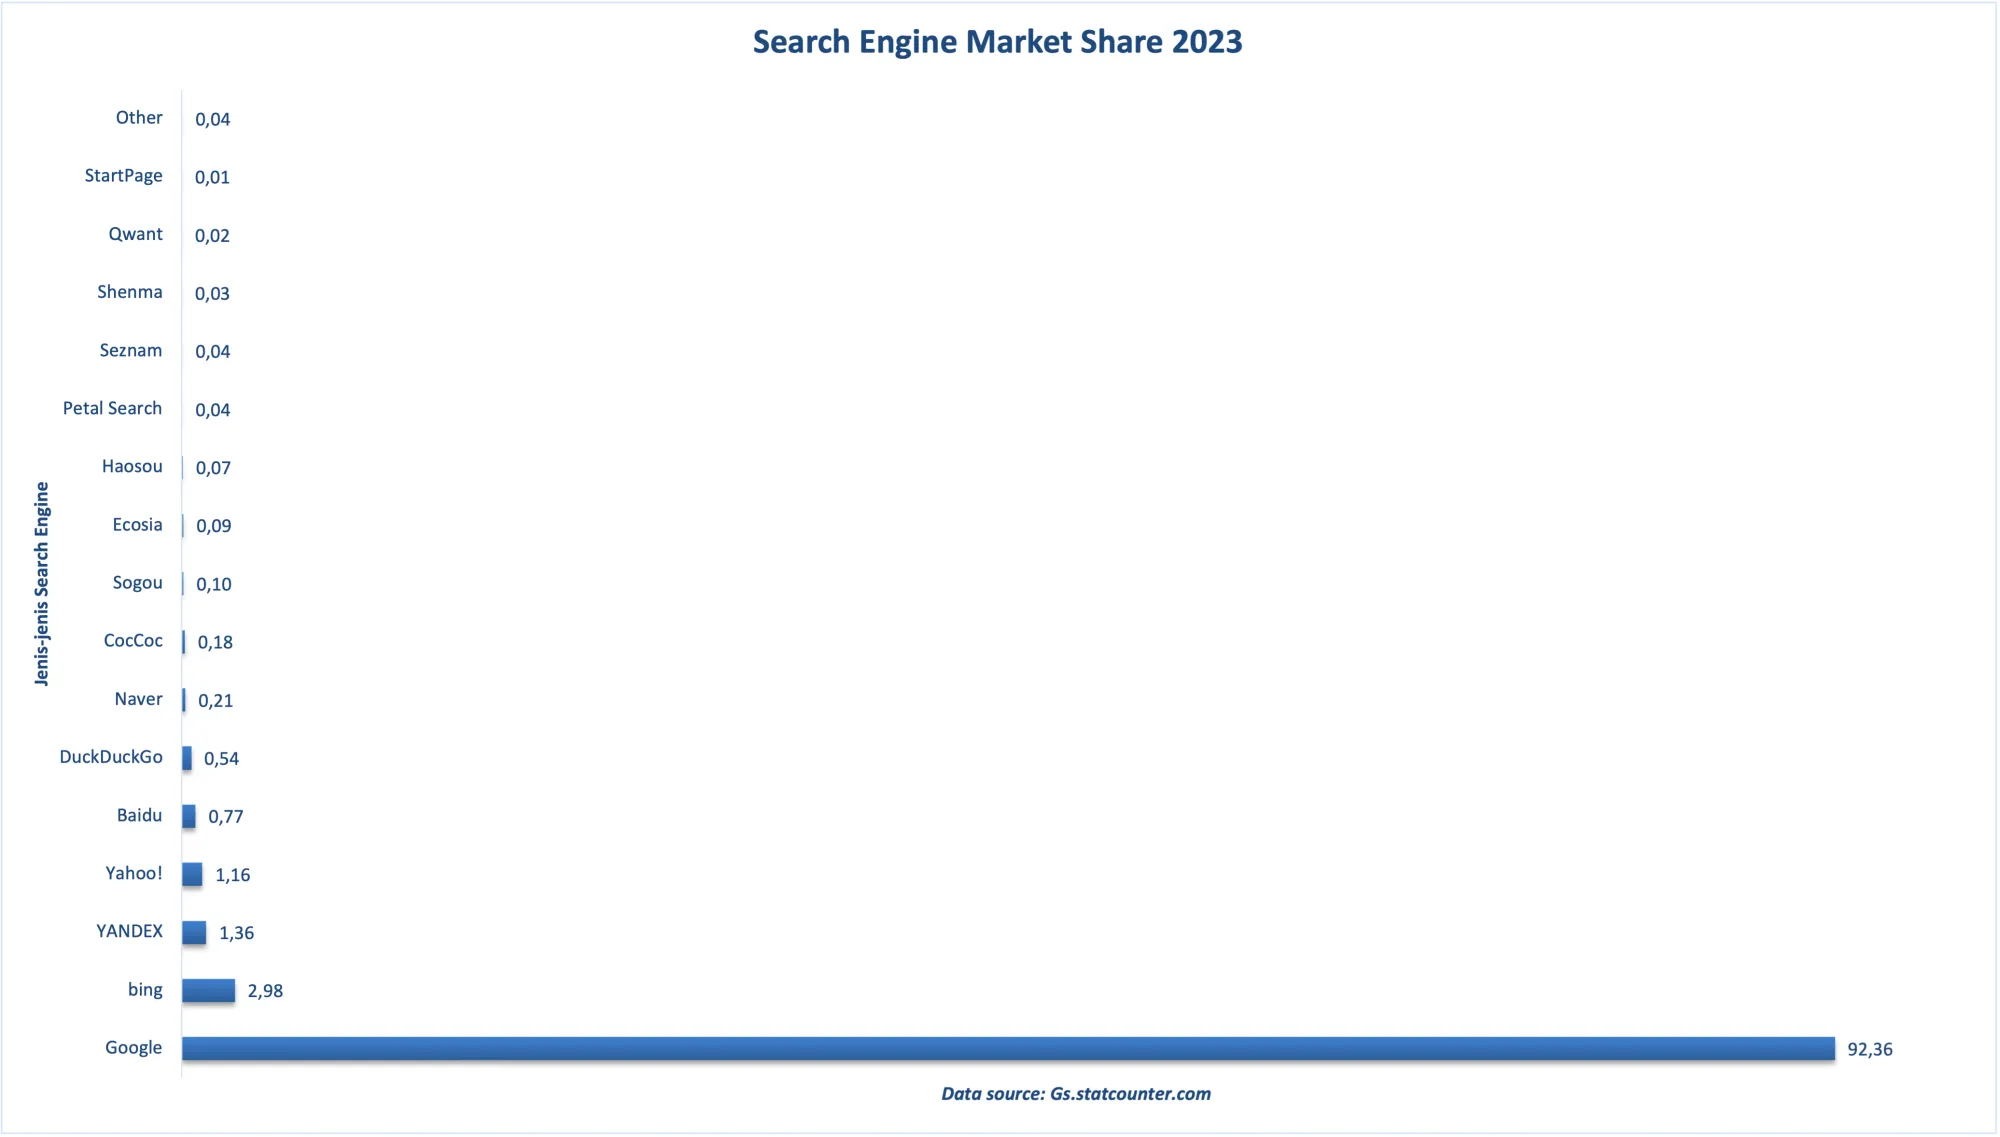 Search Engine Market Share 2023